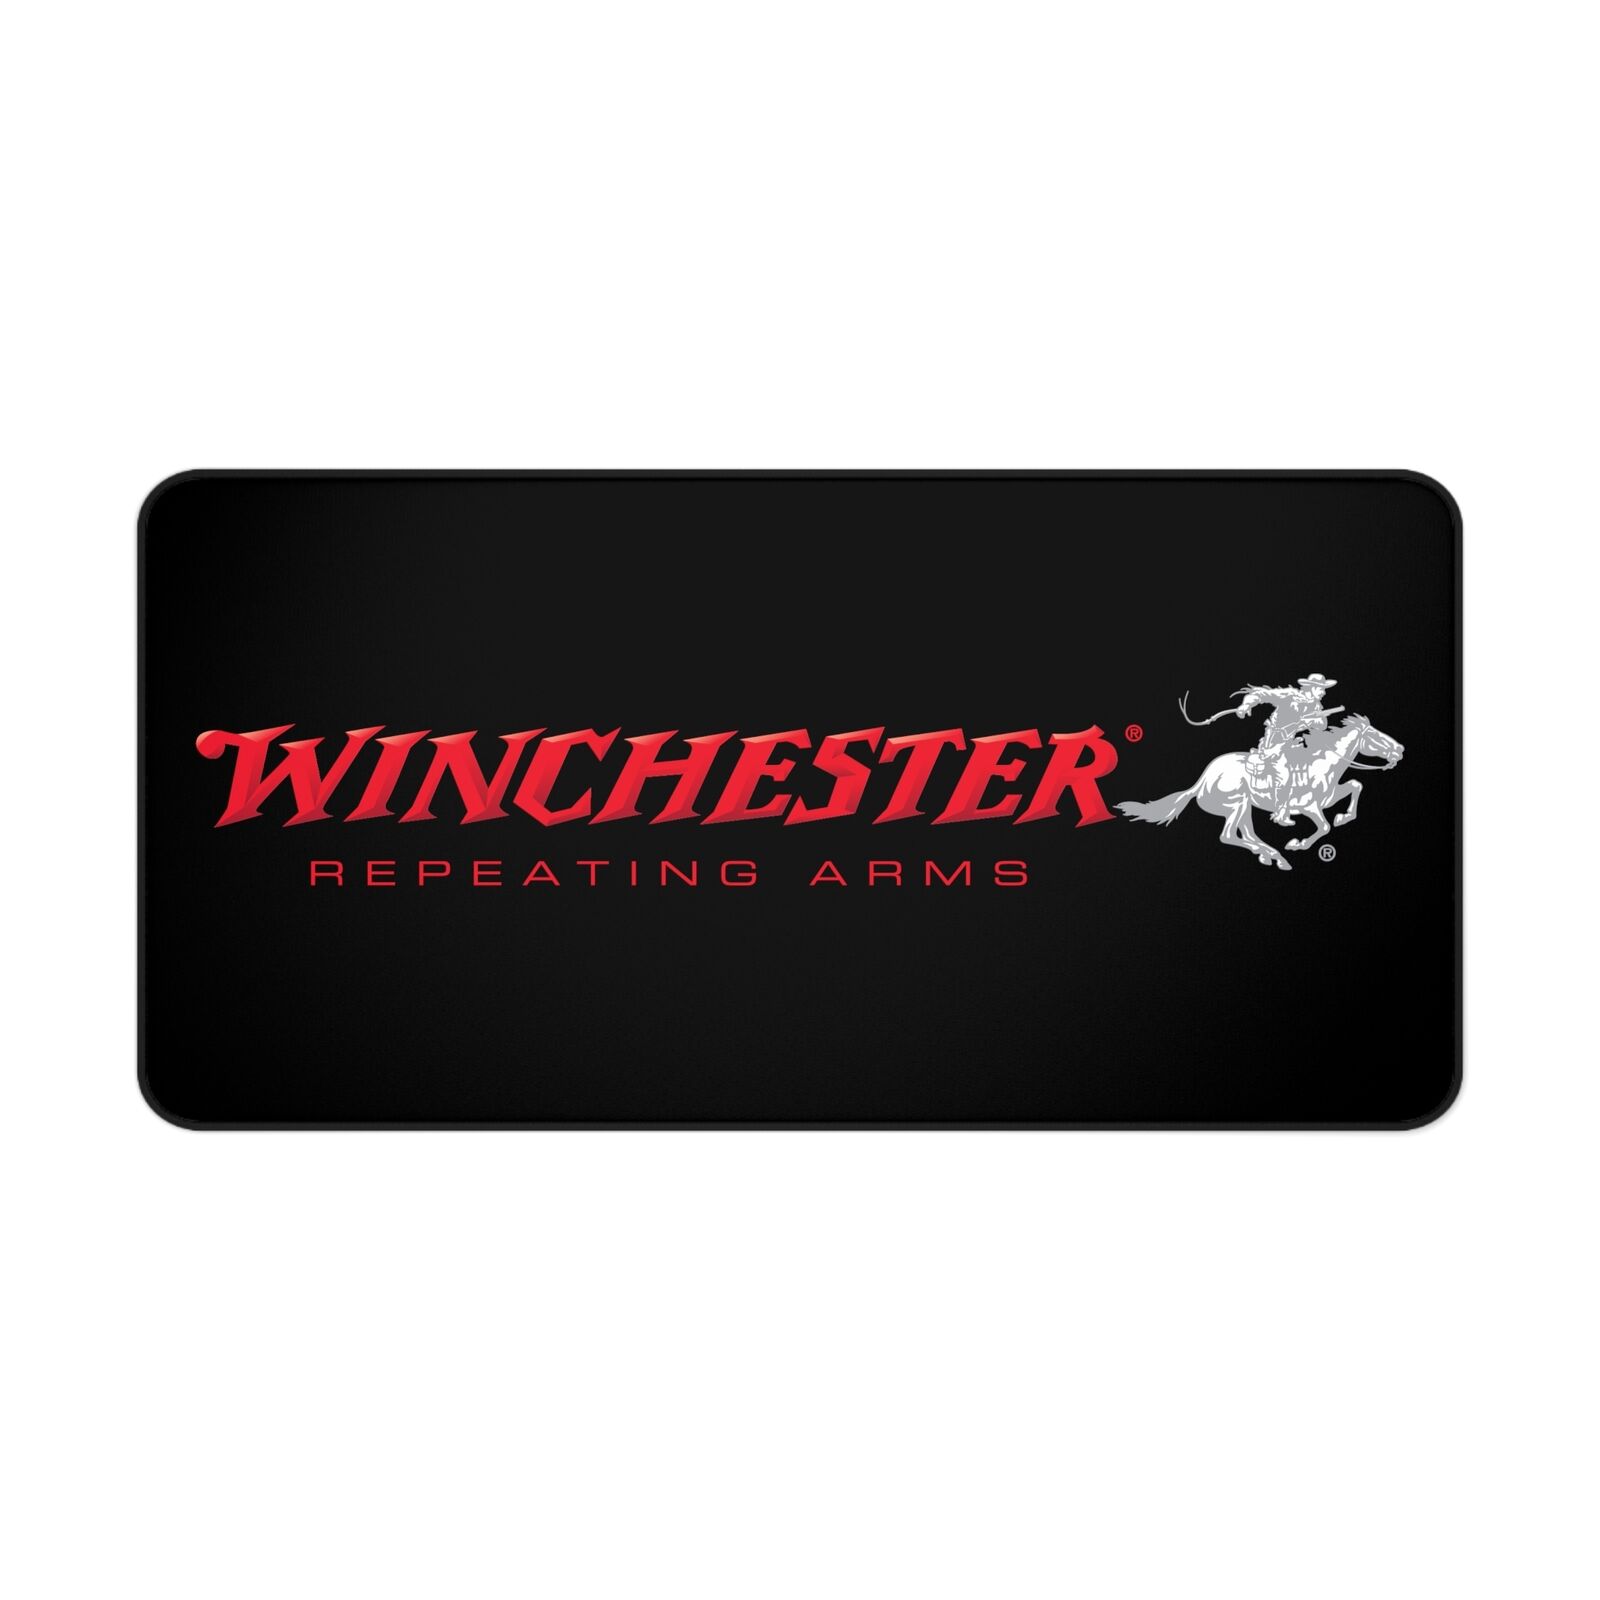 Winchester Repeating Arms Firearms - Custom Design - Premium Desk Mat Mouse Pad